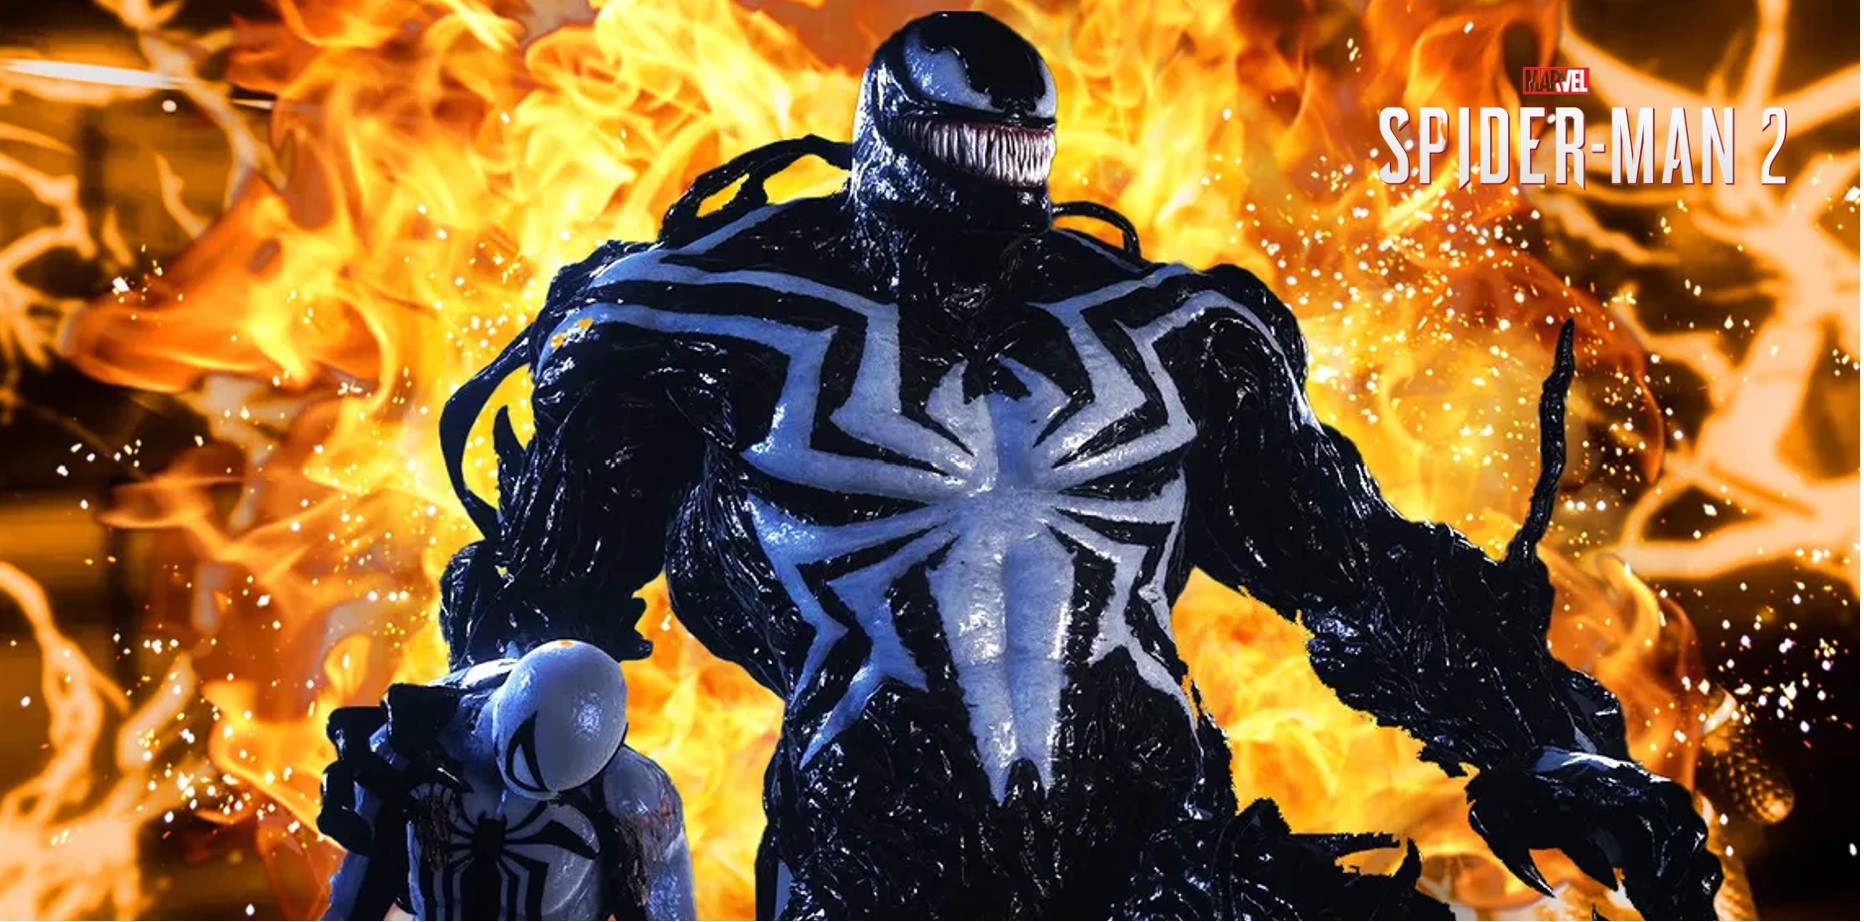 The symbiote is no longer affected by fire